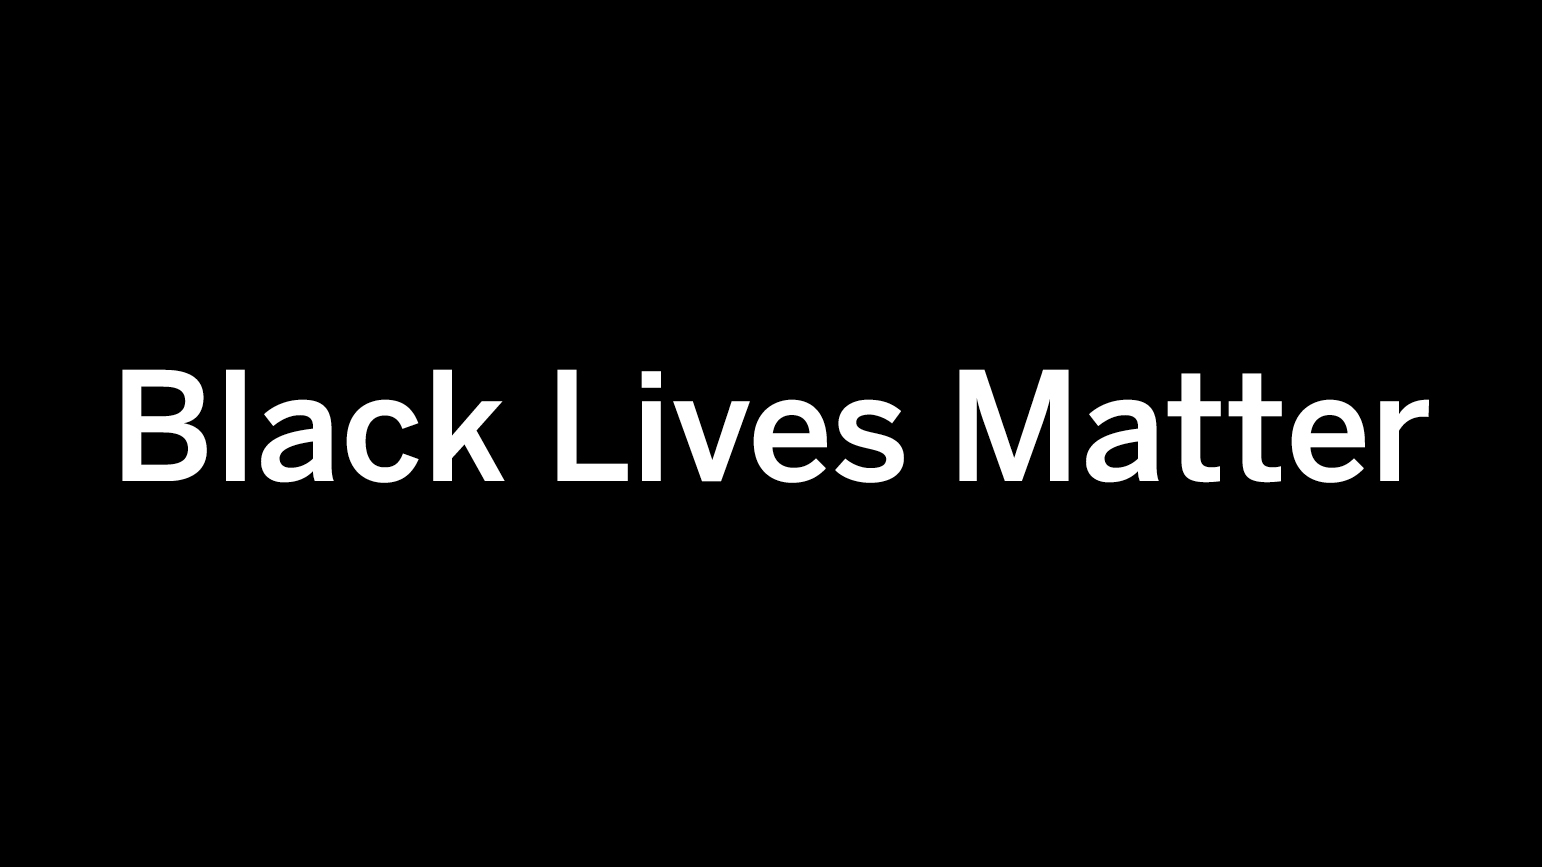 The words "Black Lives Matter" in white against a black background